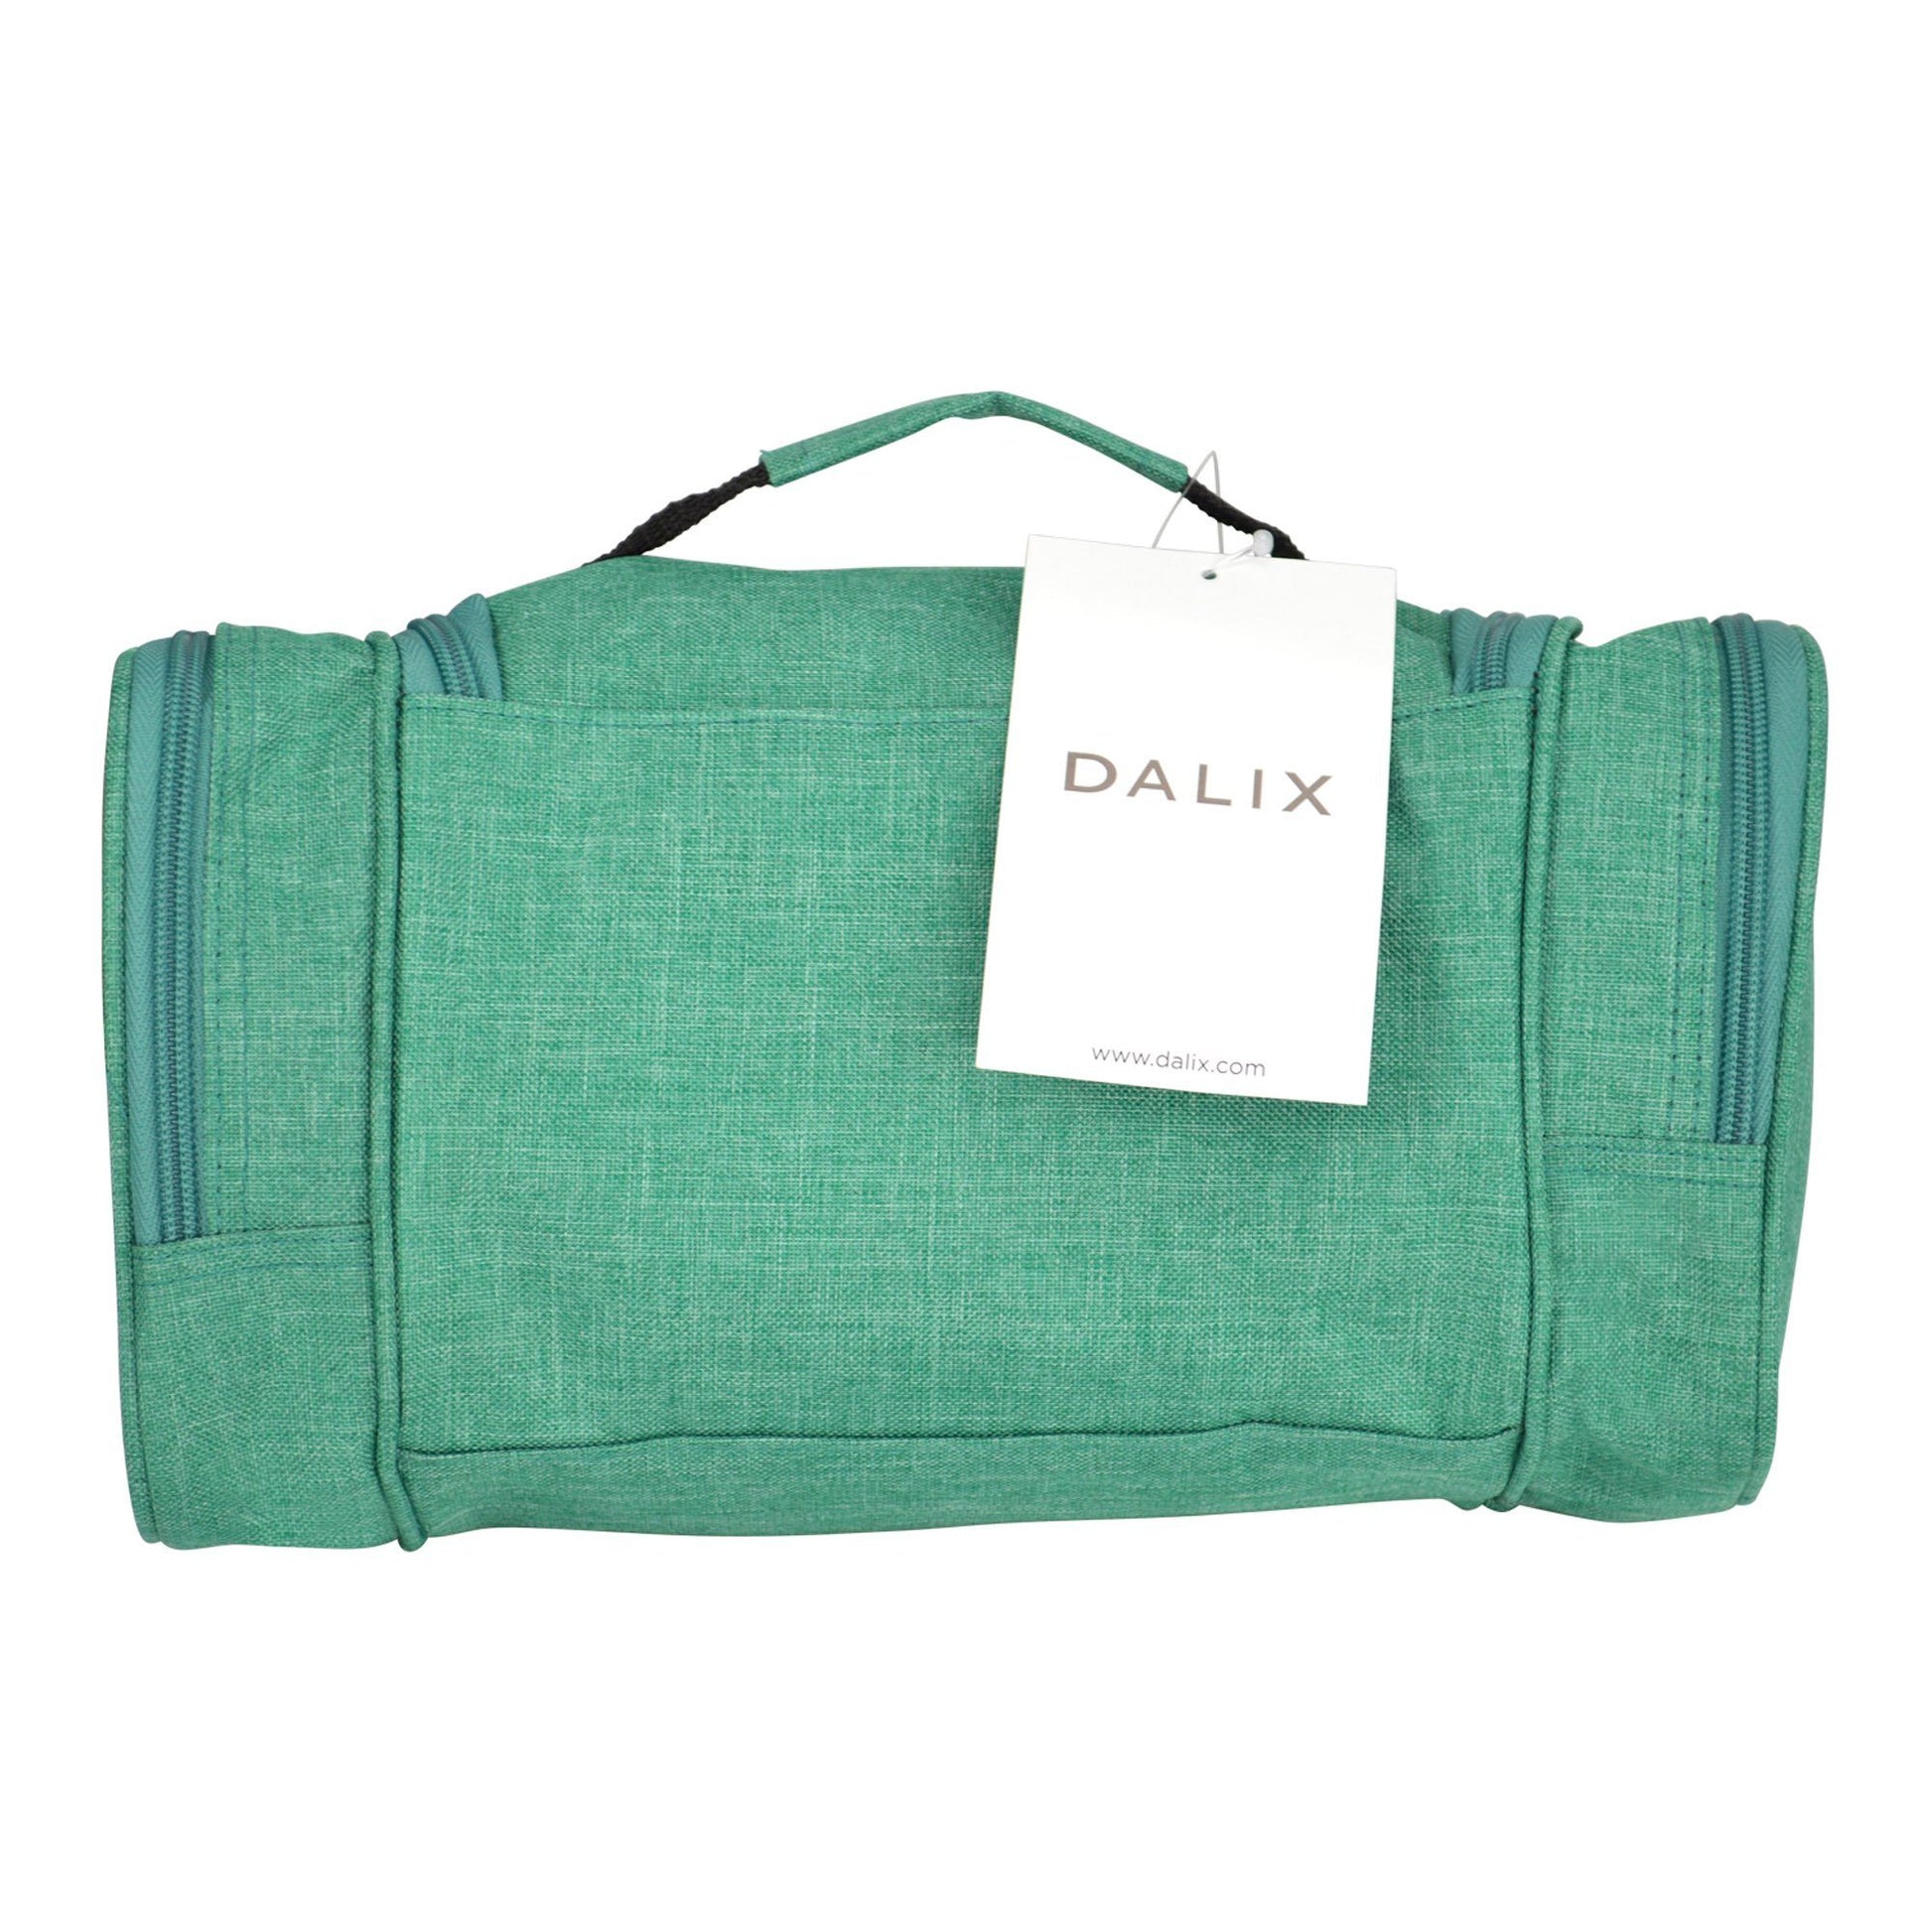 DALIX Hanging Travel Toiletry Kit Accessories Bag (8 Colors) Business DALIX 